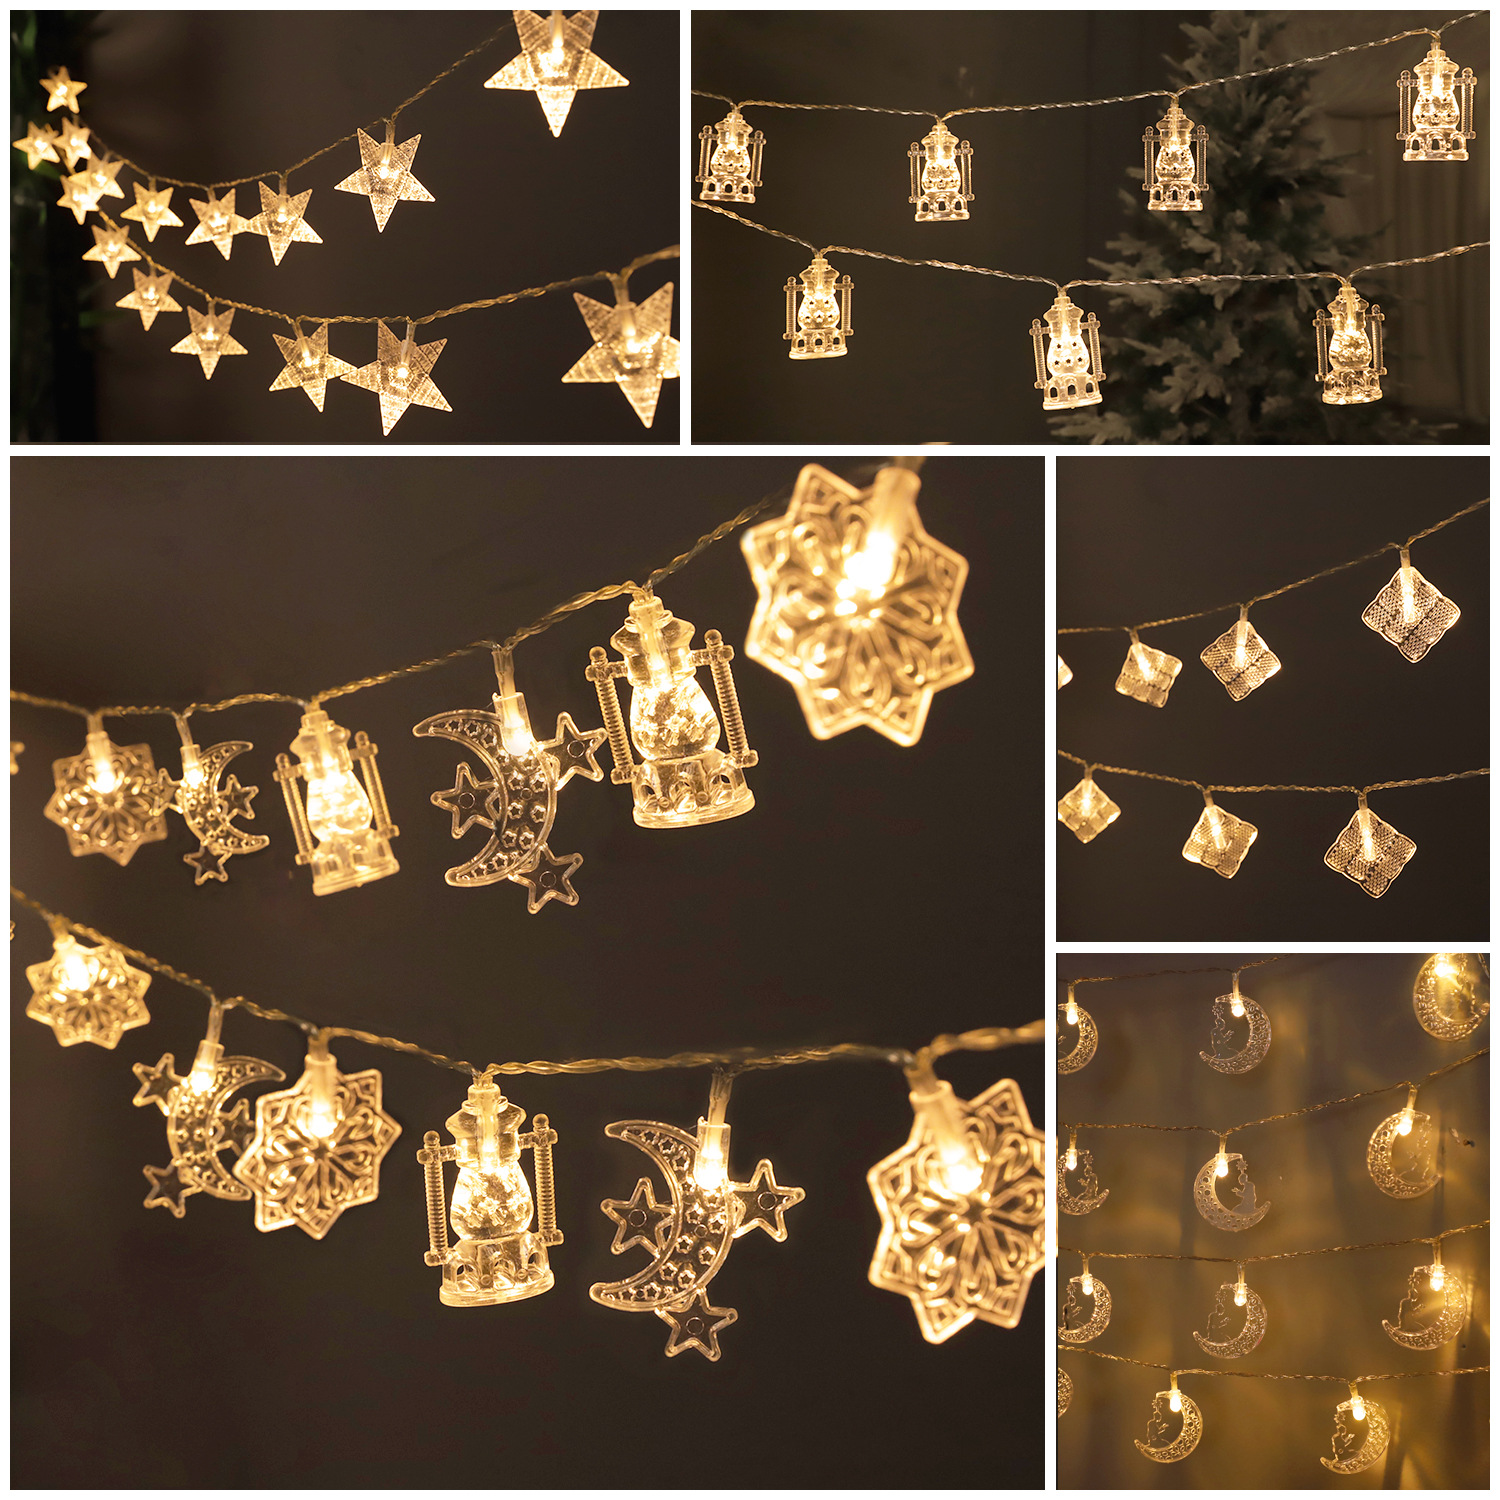 LED Star Moon Lighting Chain Moon XINGX Color String Room Layout Starry Camping String Battery USB Remote Control Type